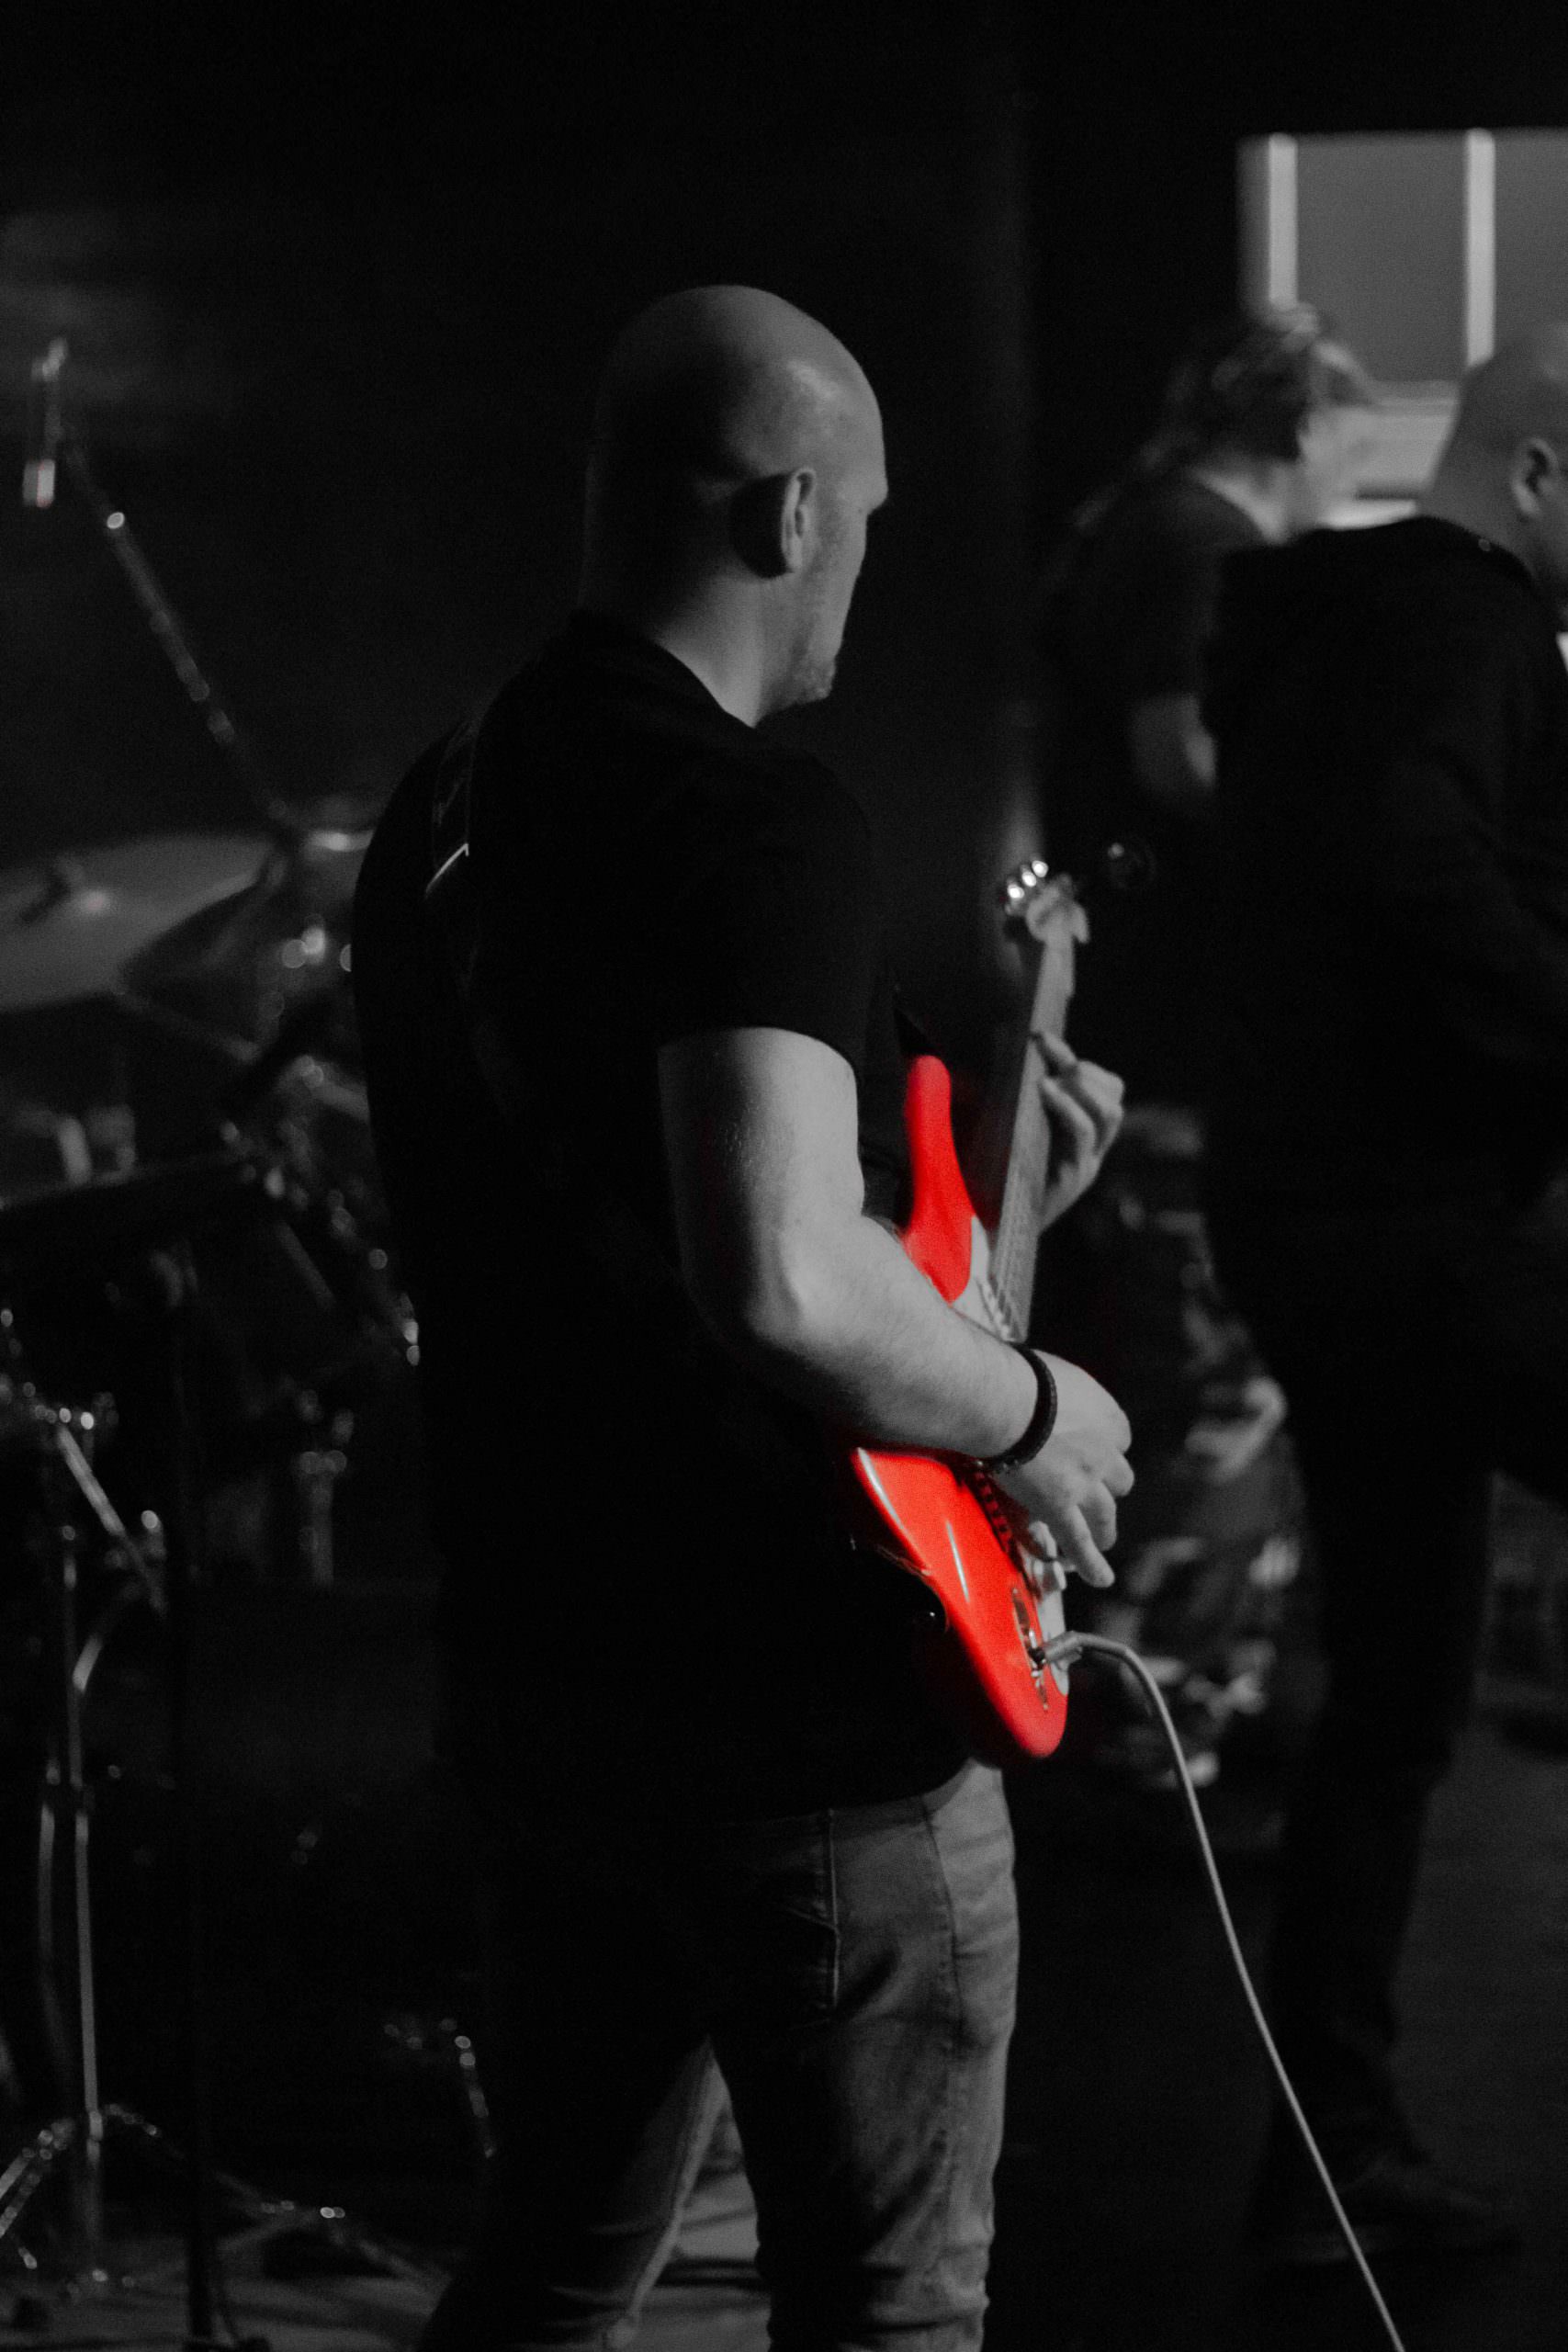 guitar player with red guitar (black and white)